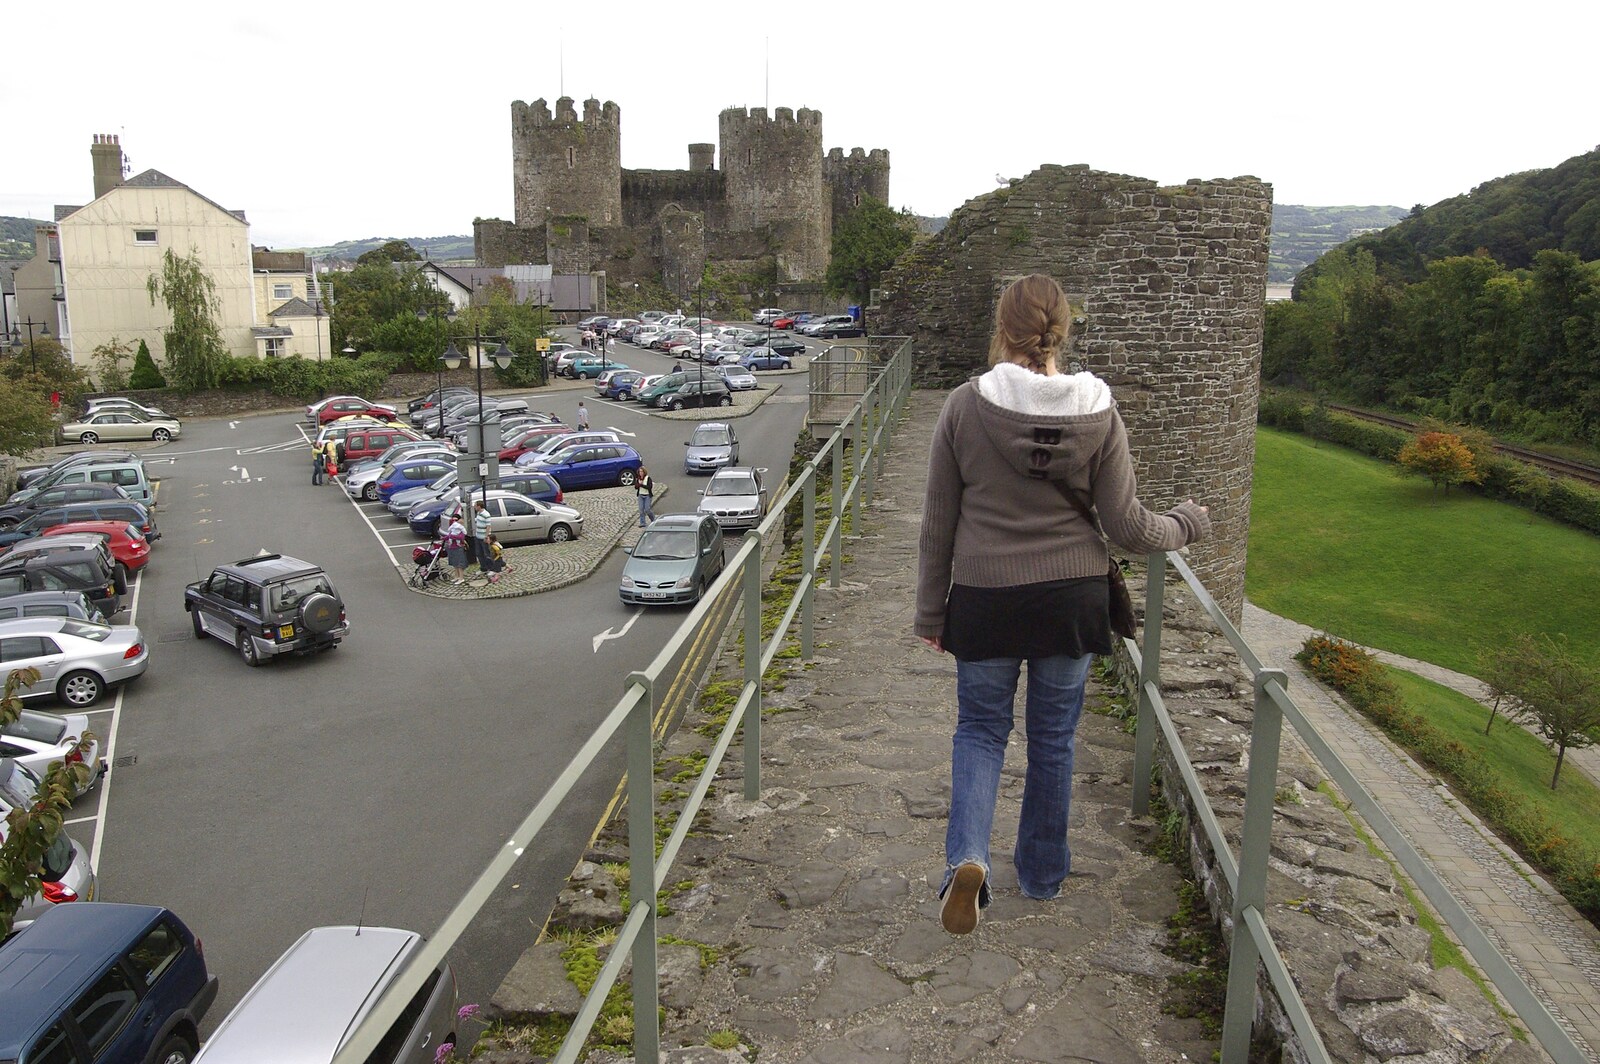 Isobel wanders the castle walls from A Road Trip to Ireland Via Sandbach and Conwy, Cheshire and Wales - 21st September 2007